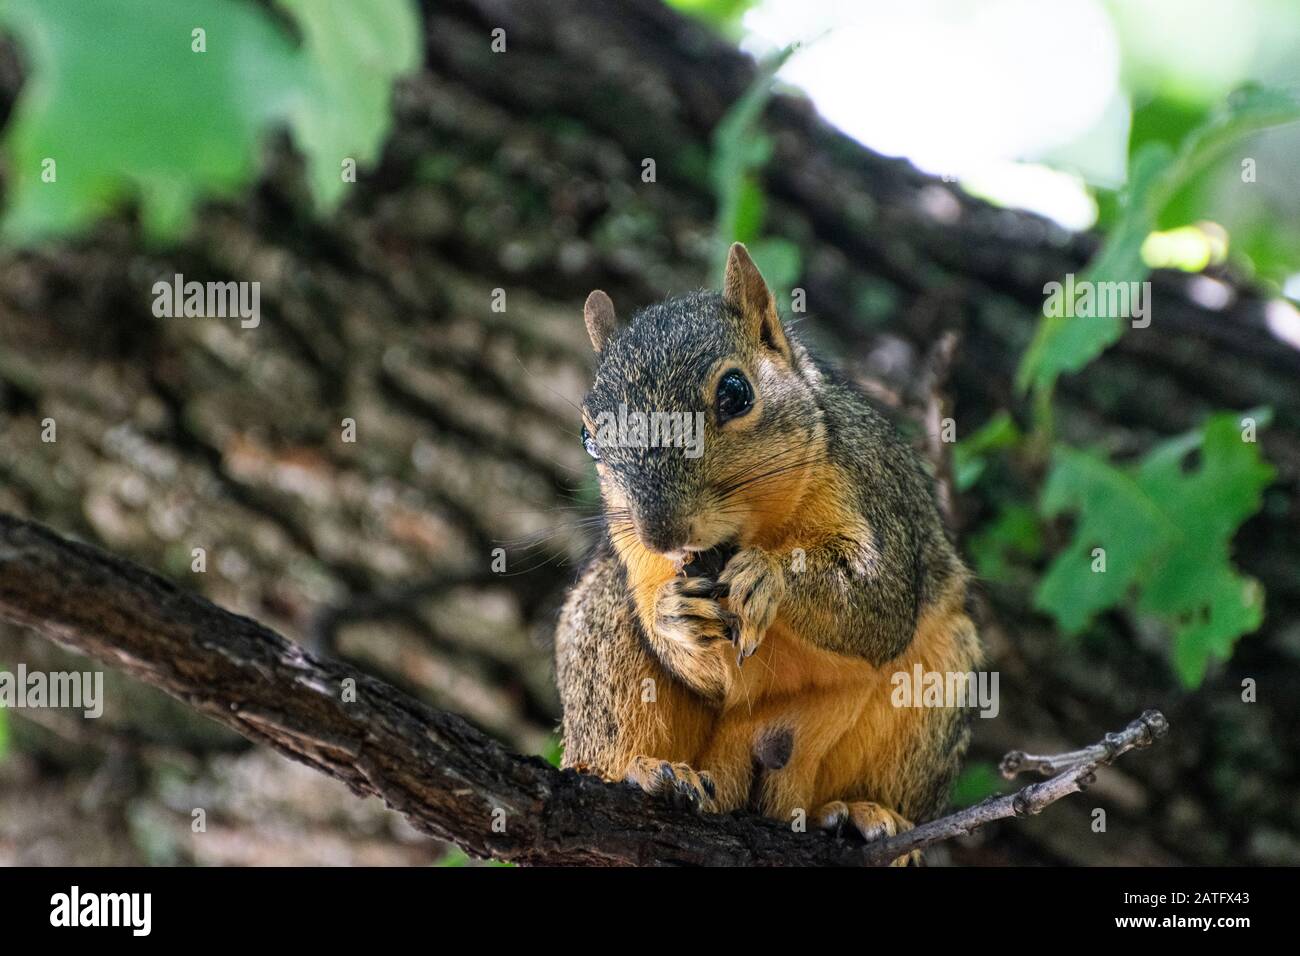 Closeup of a cute Fox Squirrel sitting on a branch in an Oak Tree and eating an acorn or some other type of nut that it’s holding in its fuzzy little Stock Photo